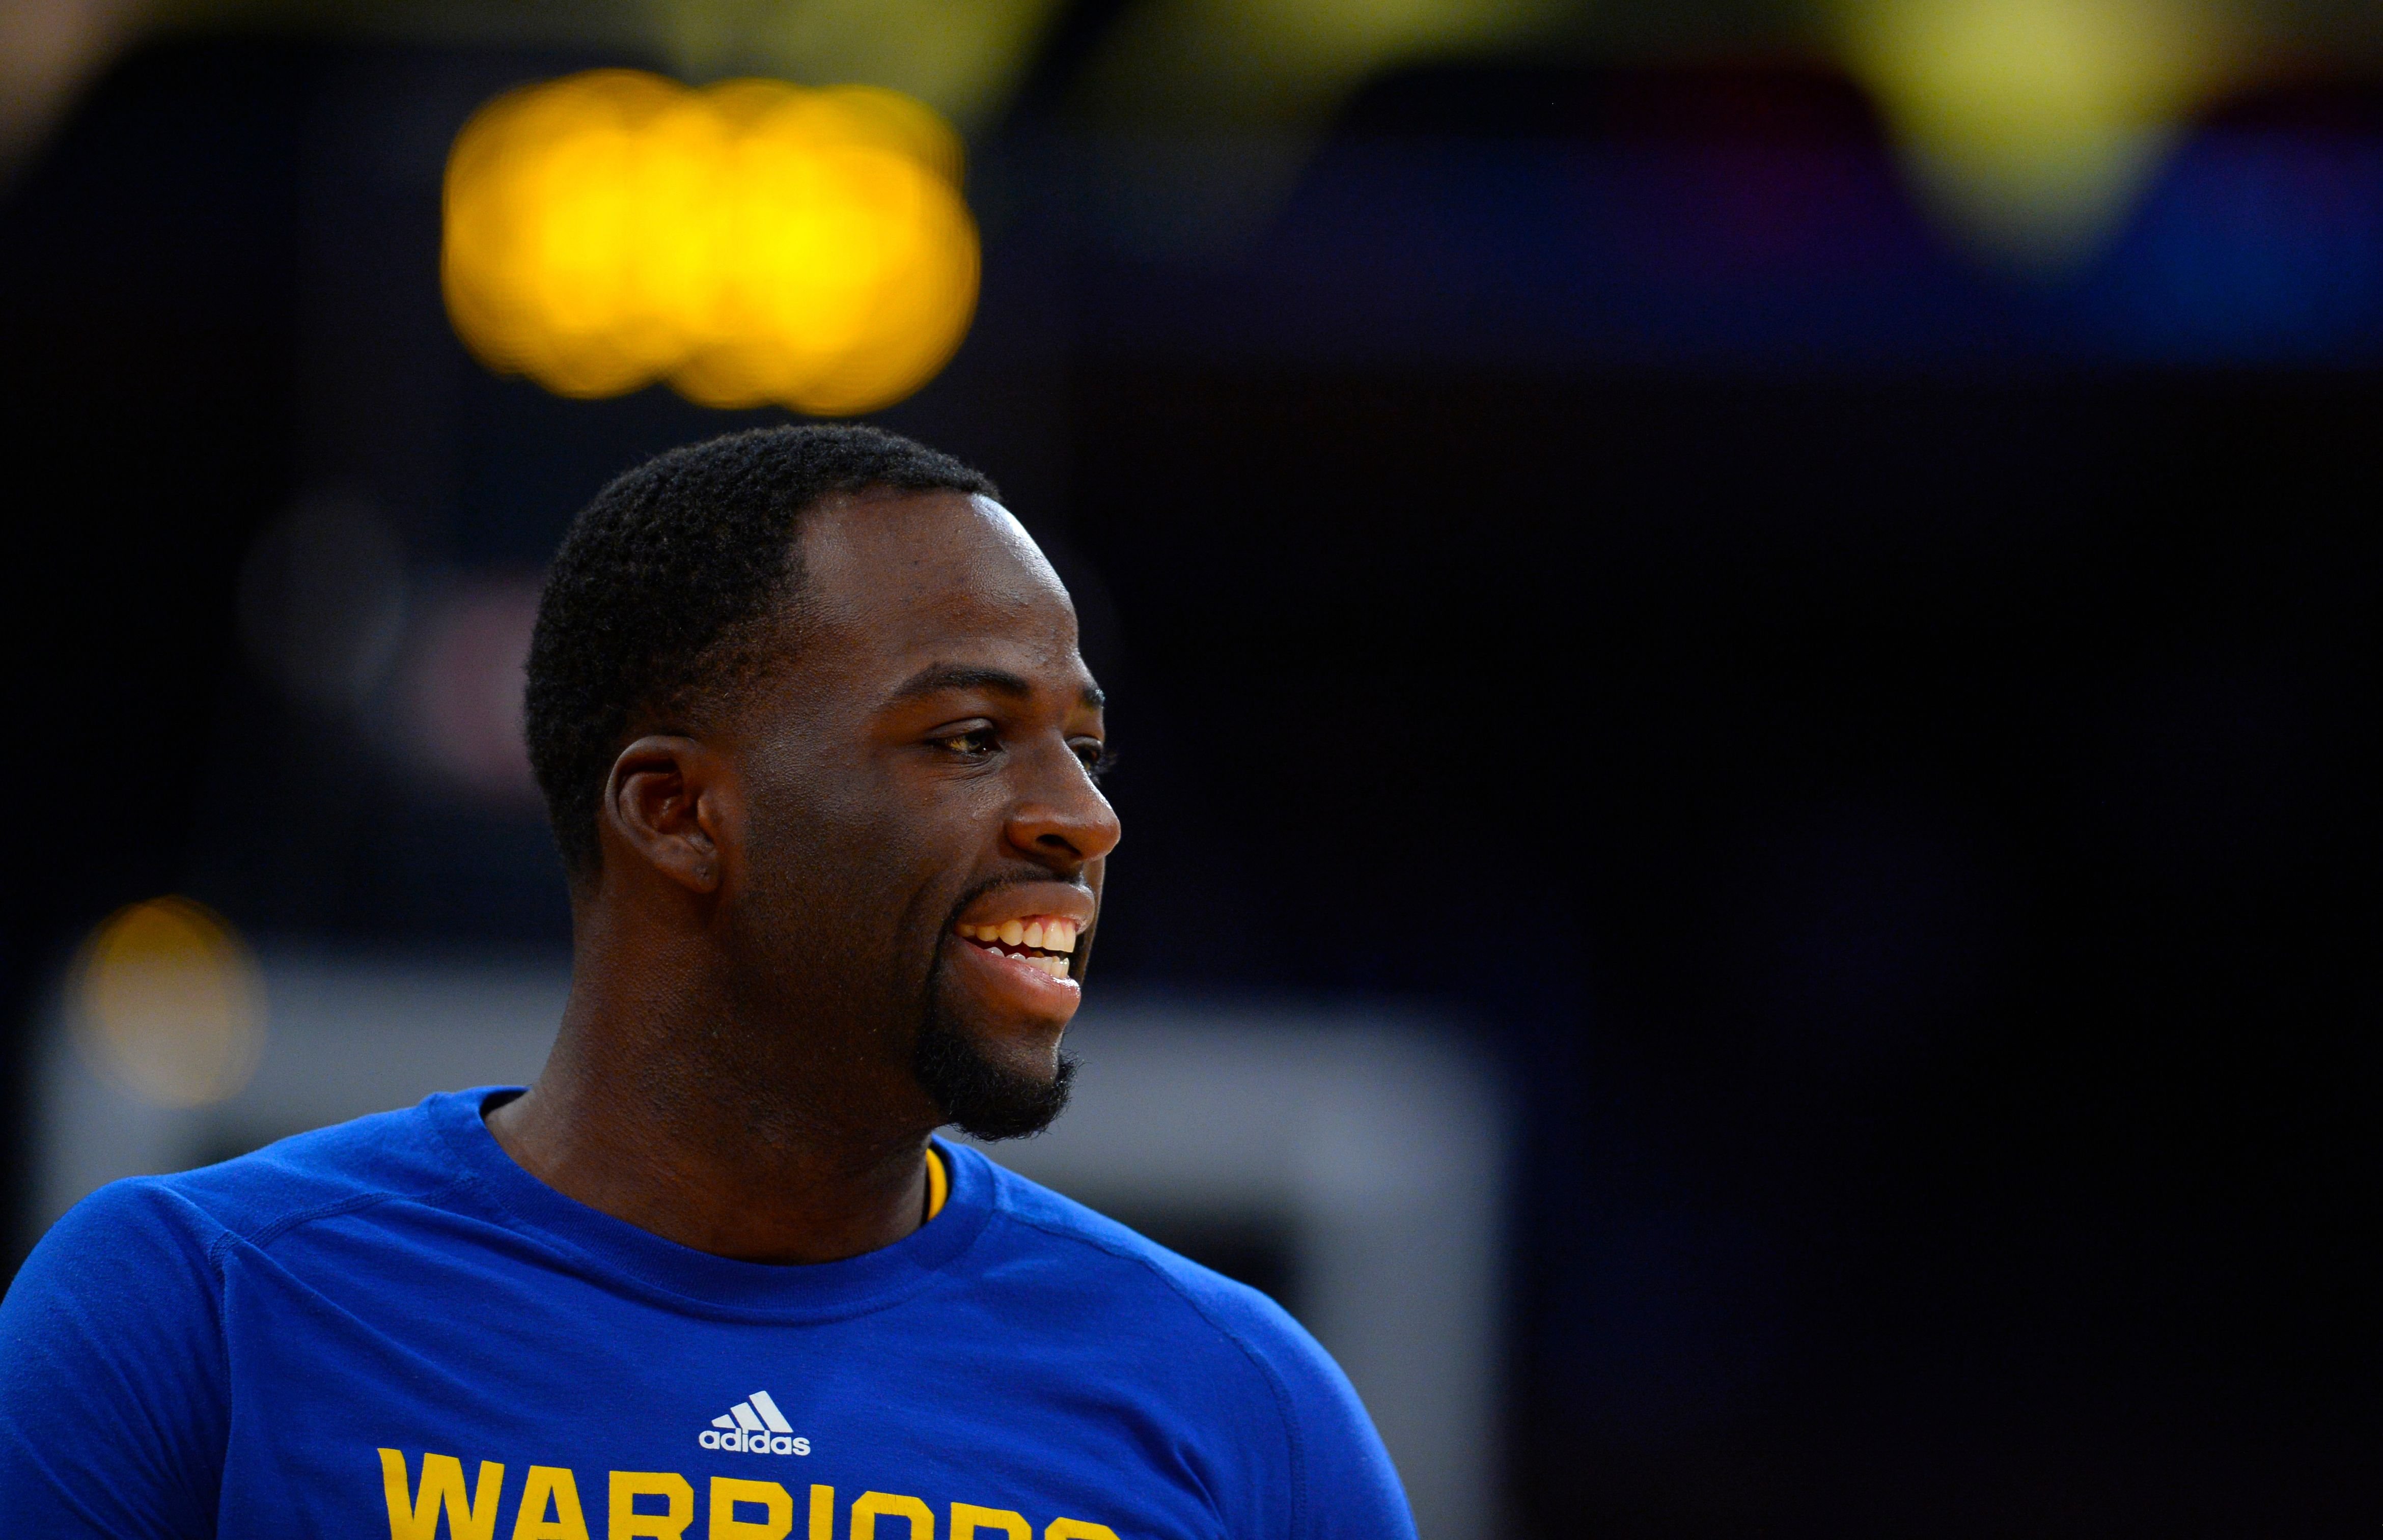 Draymond Green during the game against the Los Angeles Lakers on November 25, 2016 at STAPLES Center in Los Angeles, California. | Source: Getty Images